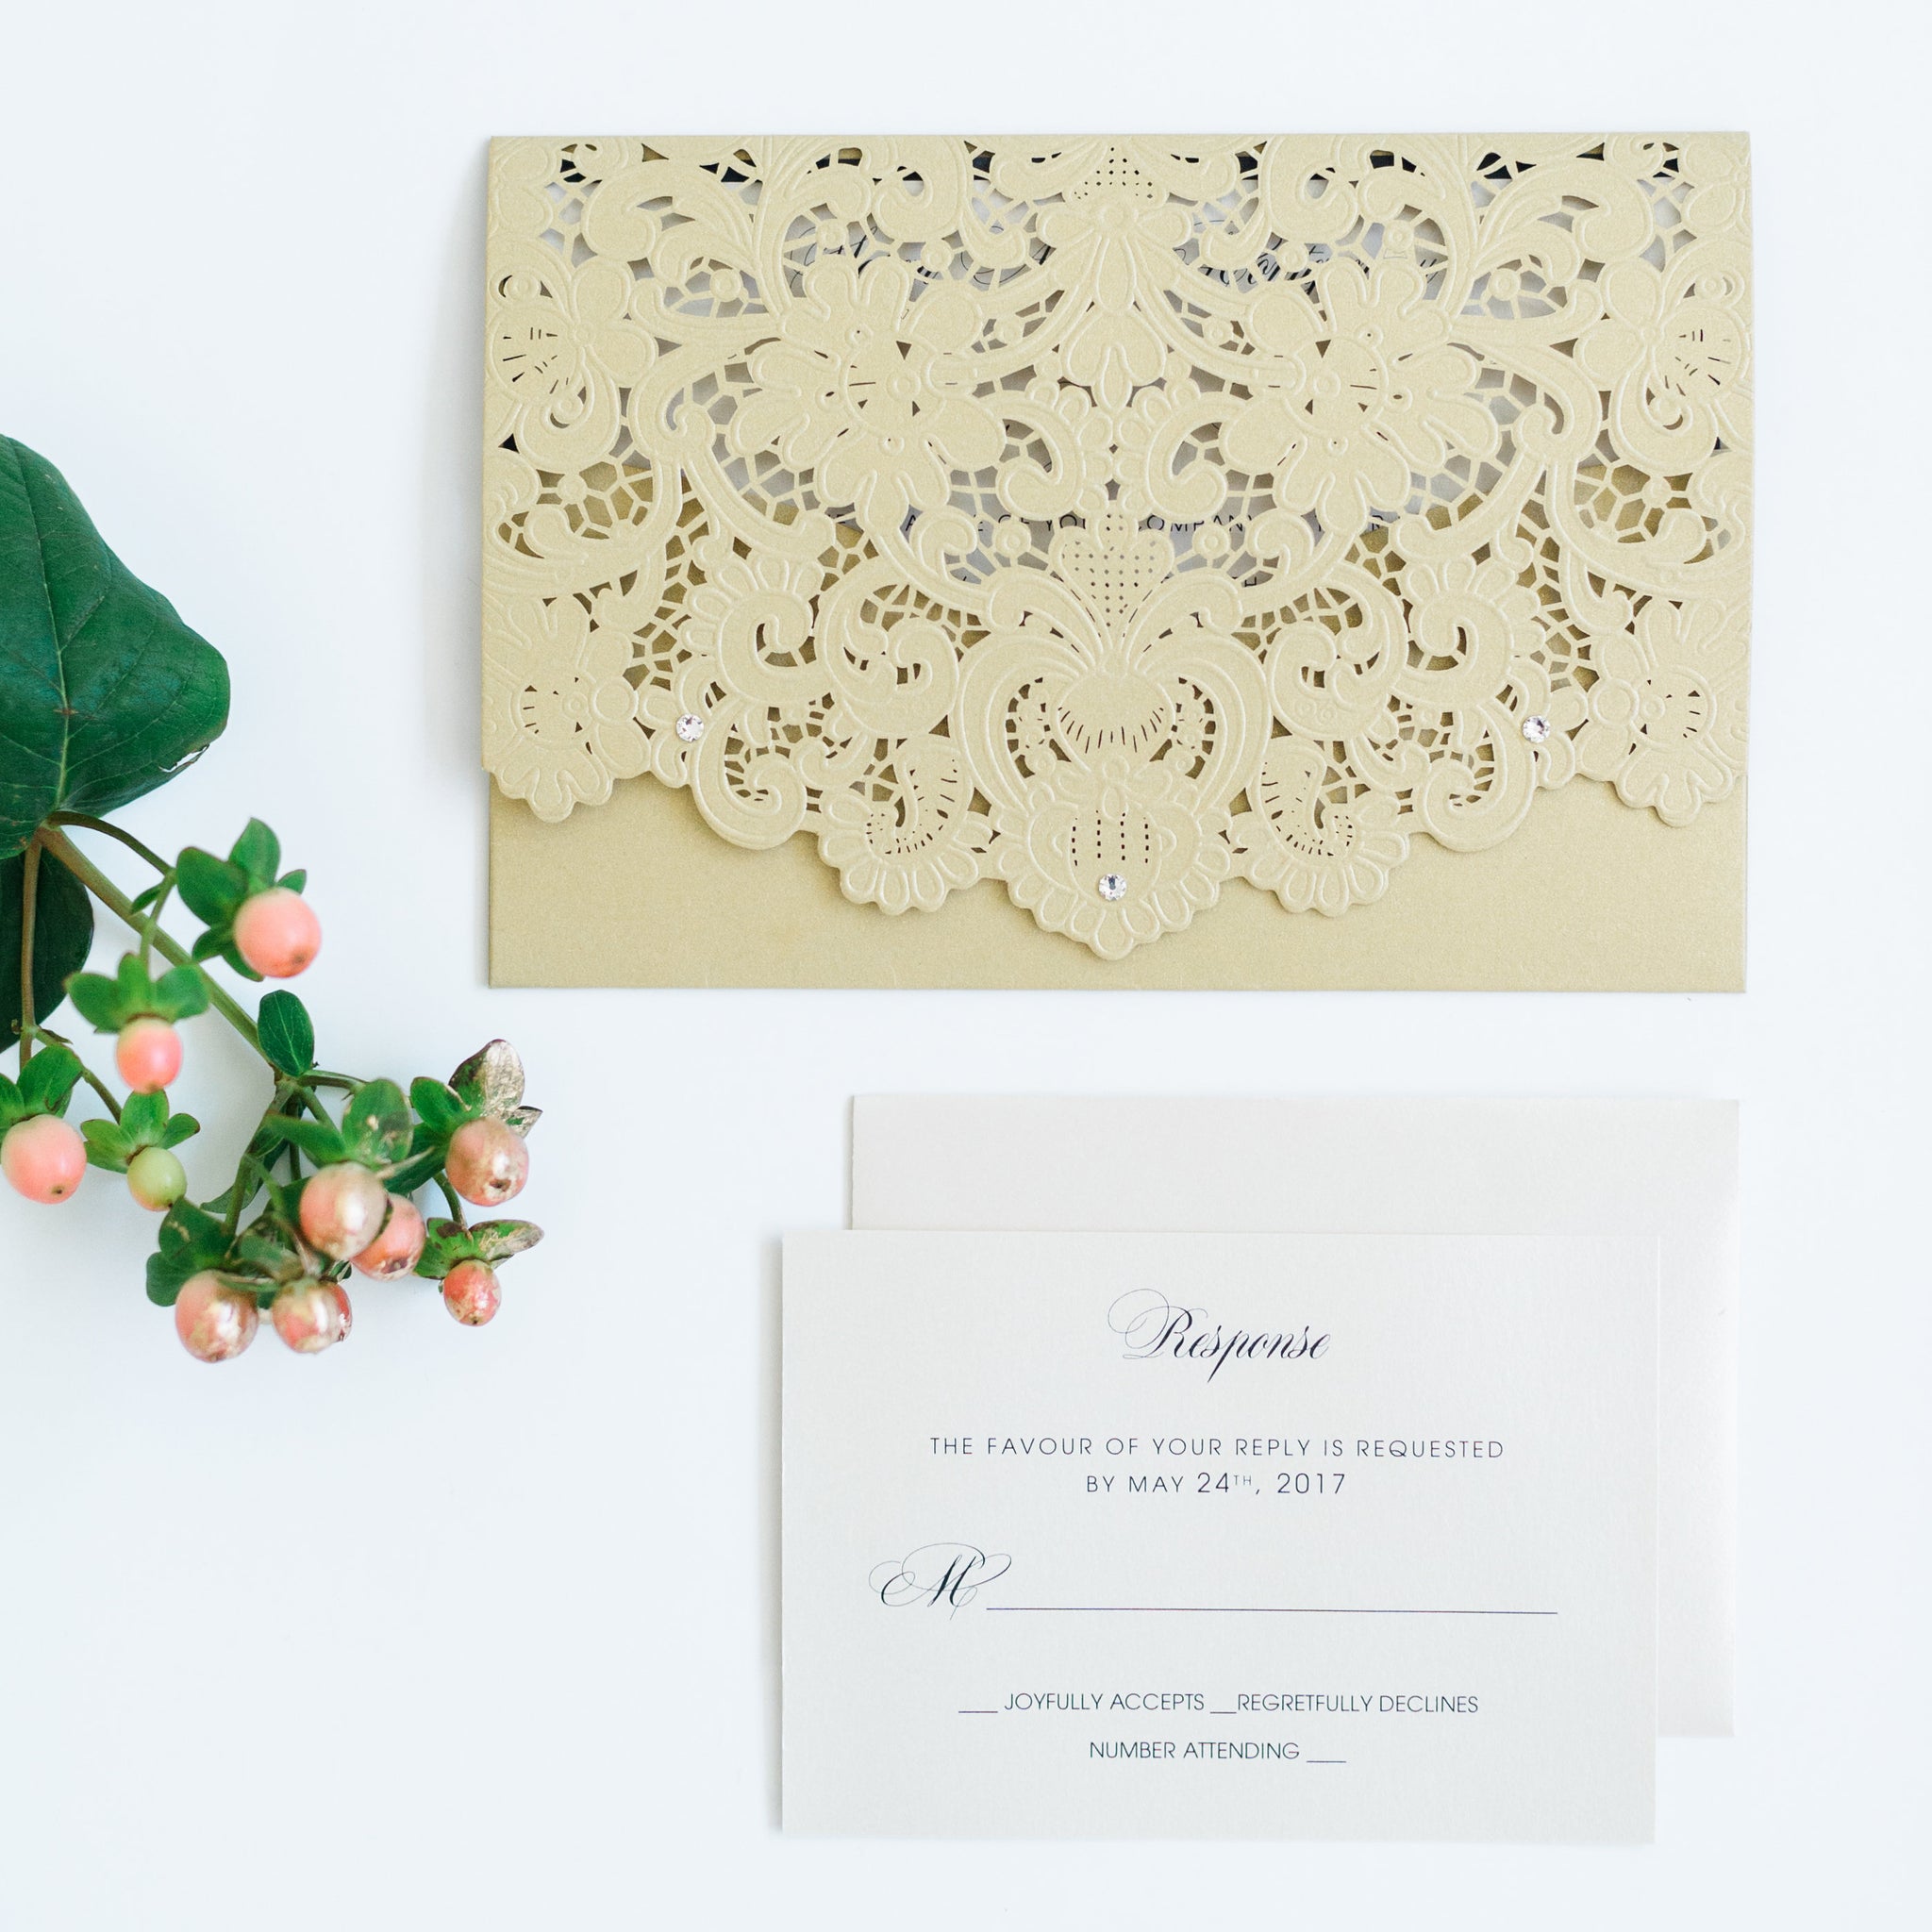 alt="Graceful gold pearlescent shimmer laser cut  pocket wedding invitation features an ivory pearlescent shimmer stock on a black matte stock insert and is finished with jewel details"